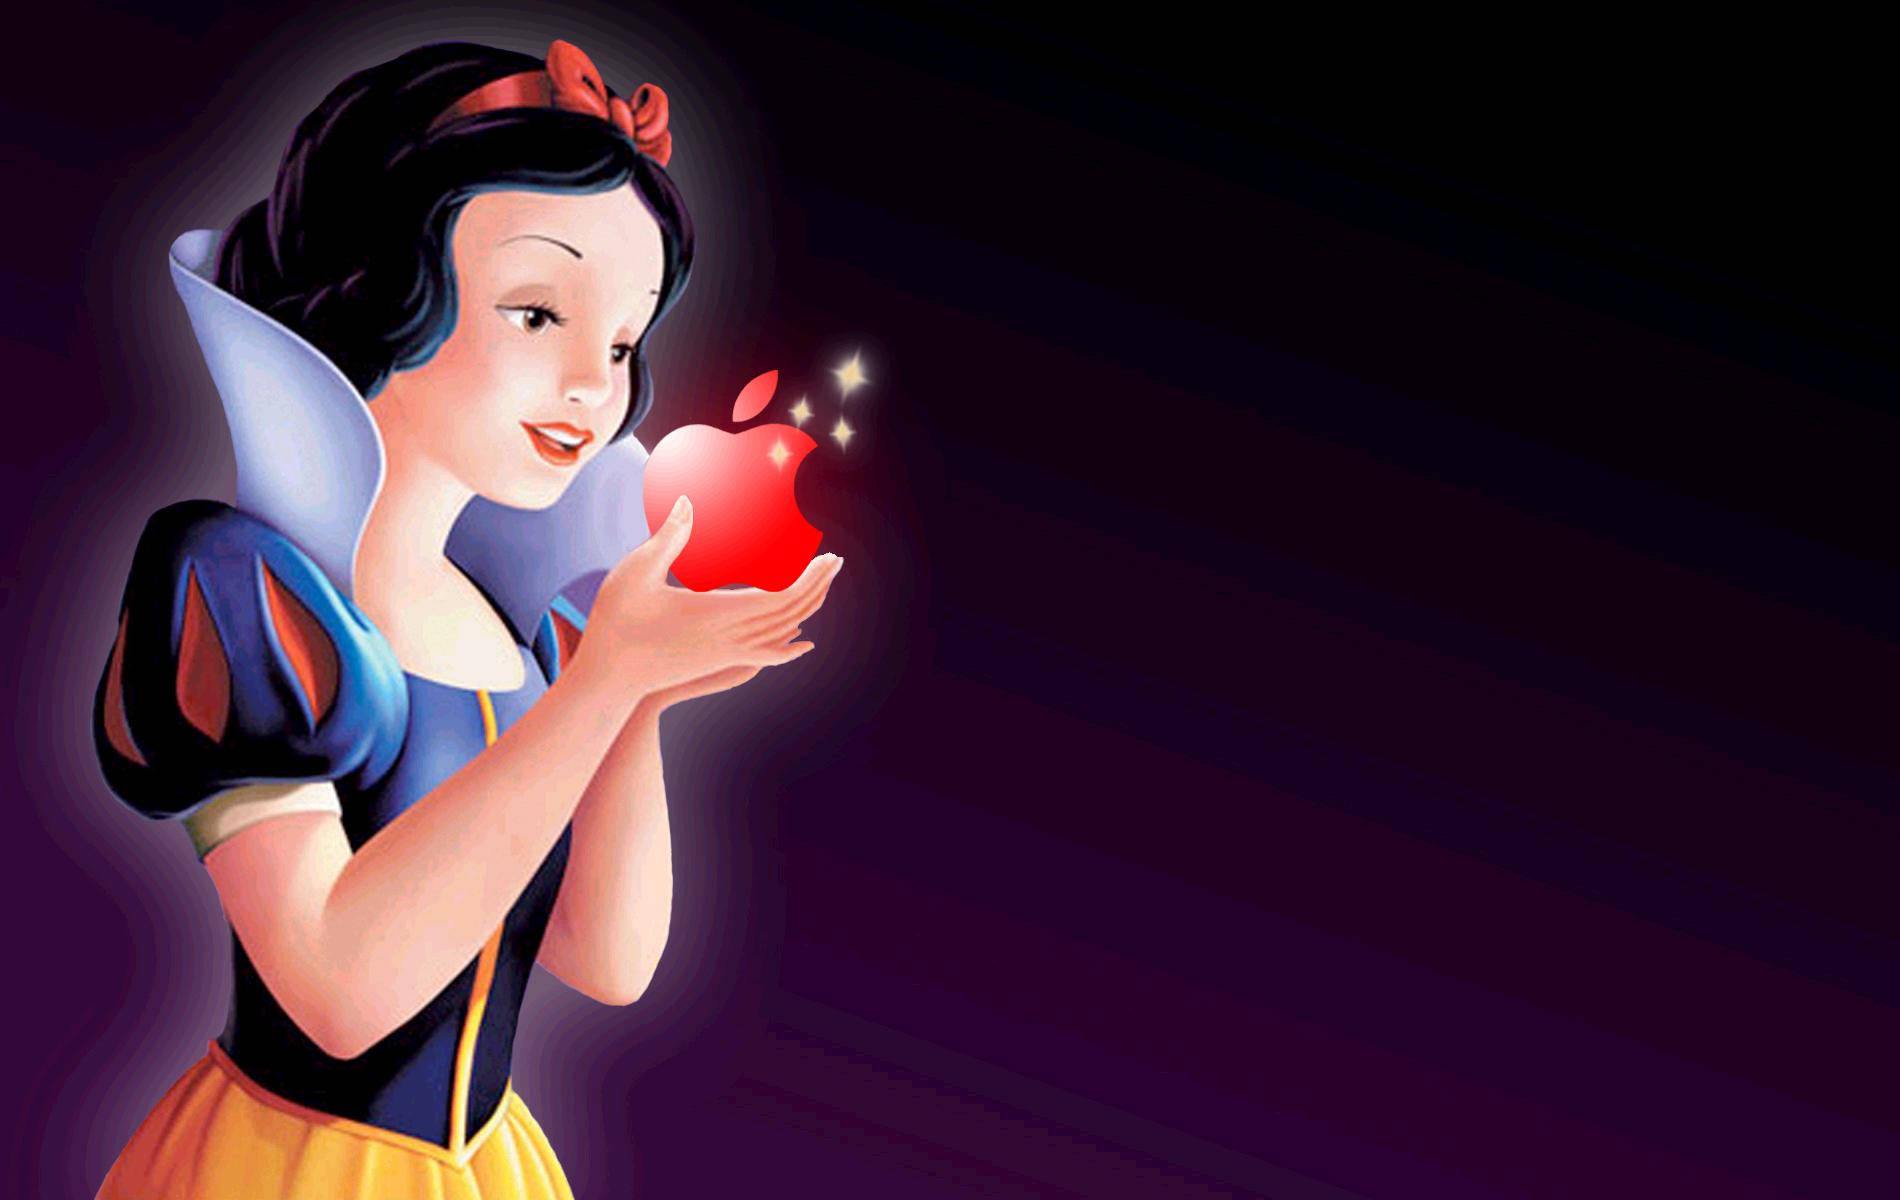 Snow White Graphic Poster Background